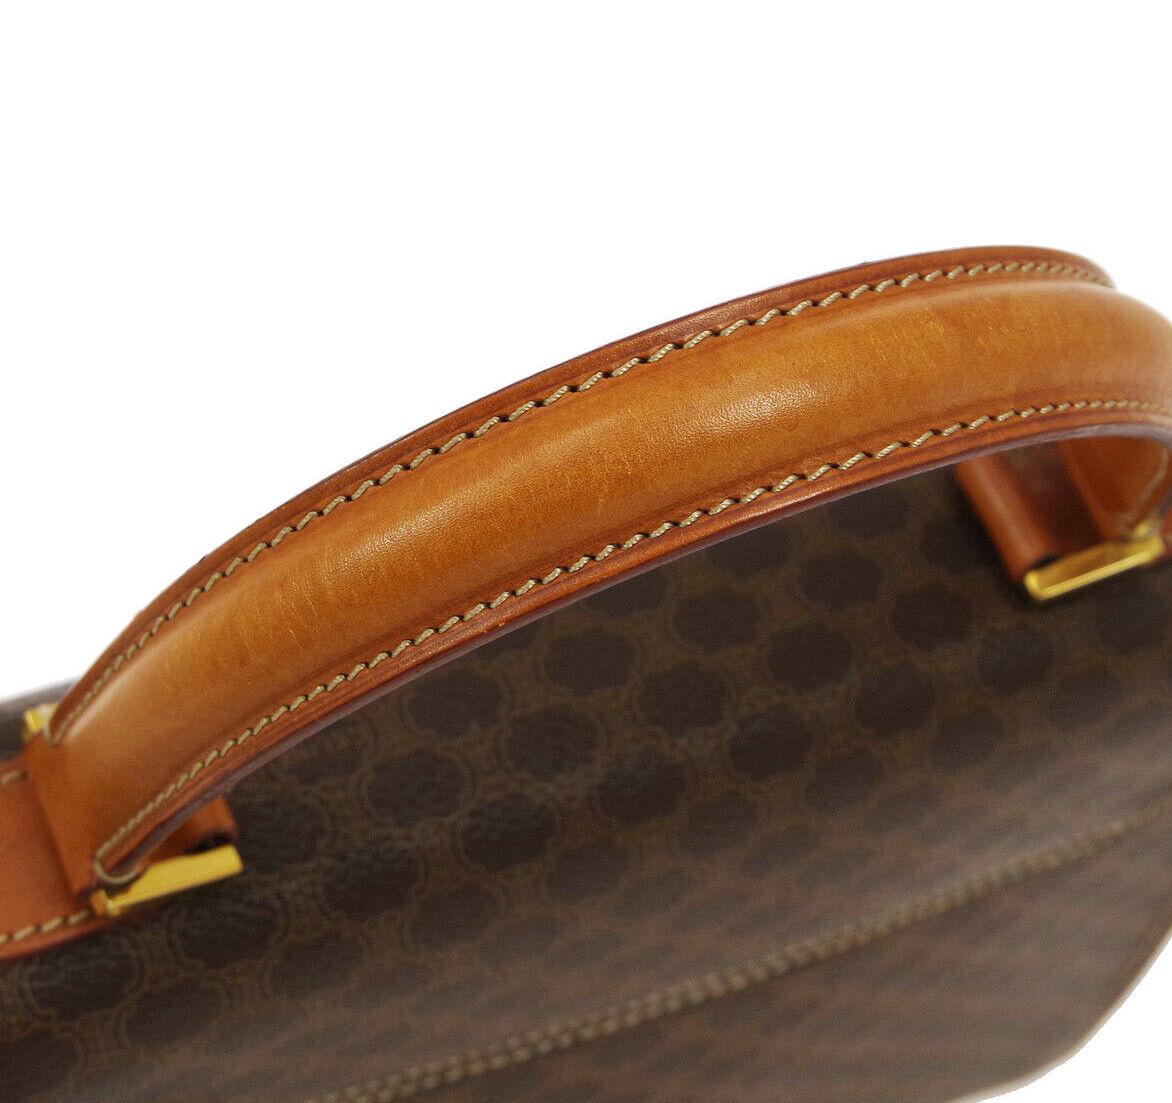 Monogram canvas
Leather
Gold tone hardware
Turnlock closure
Leather lining
Made in Italy
Top handle 4.75